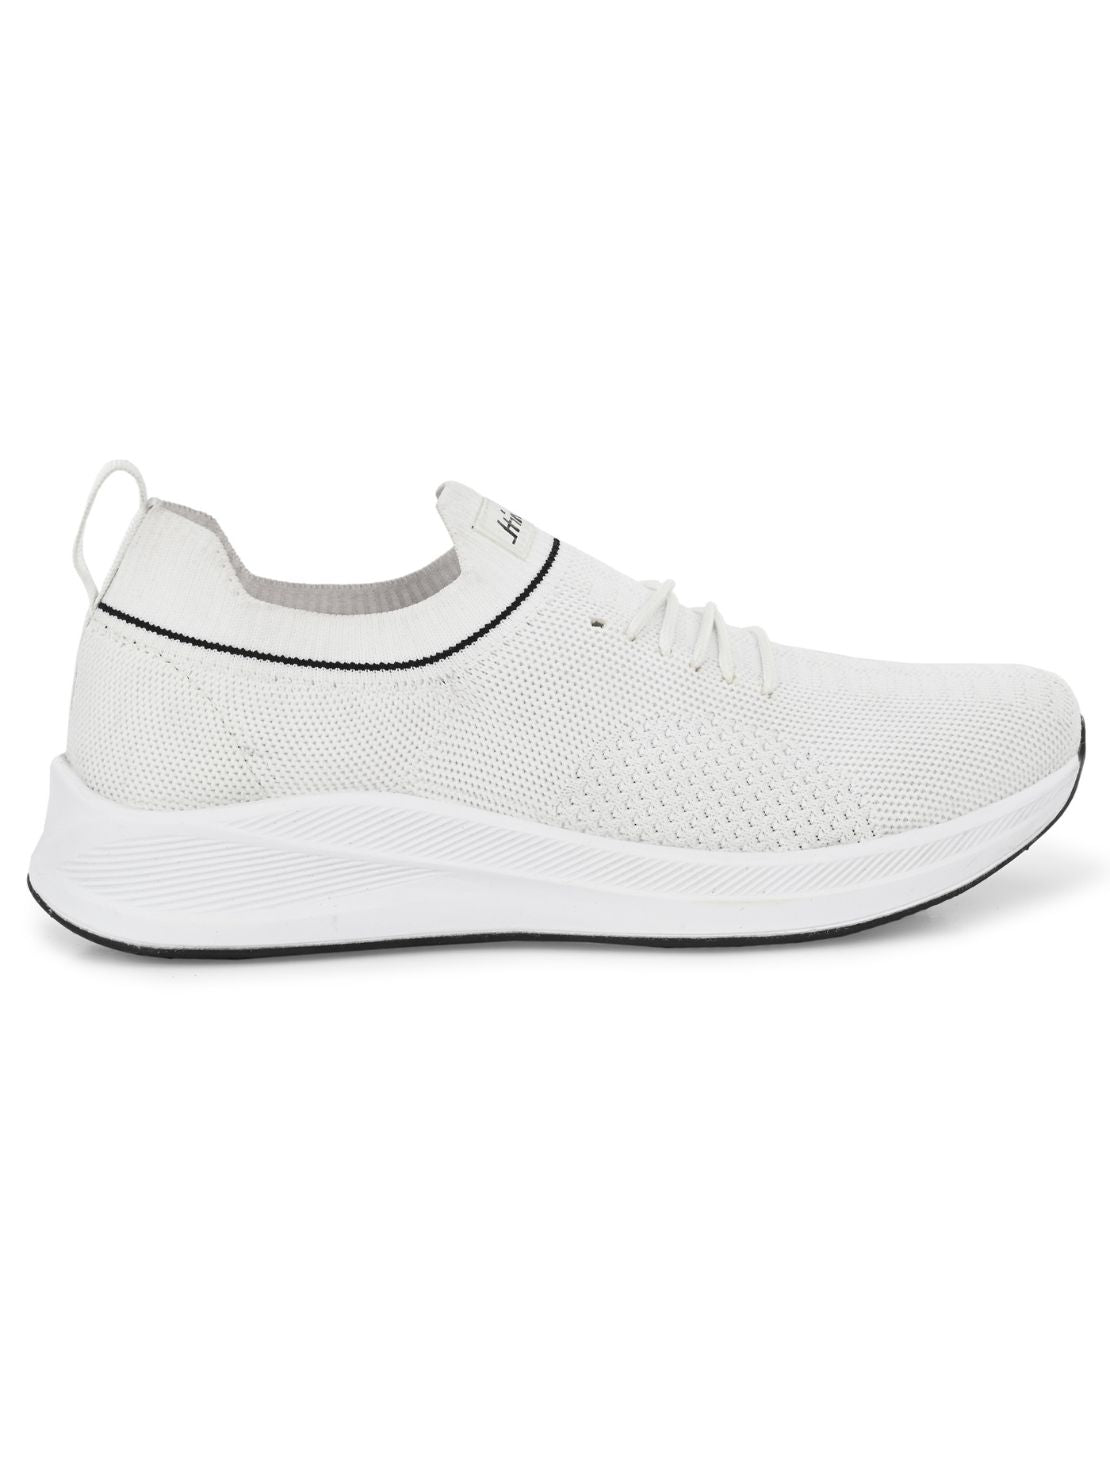 Hirolas® Women White Casual Running Walking Jogging Gym comfortable Athletic Lace-Up Sports_Shoes (HRLWF14WHT)